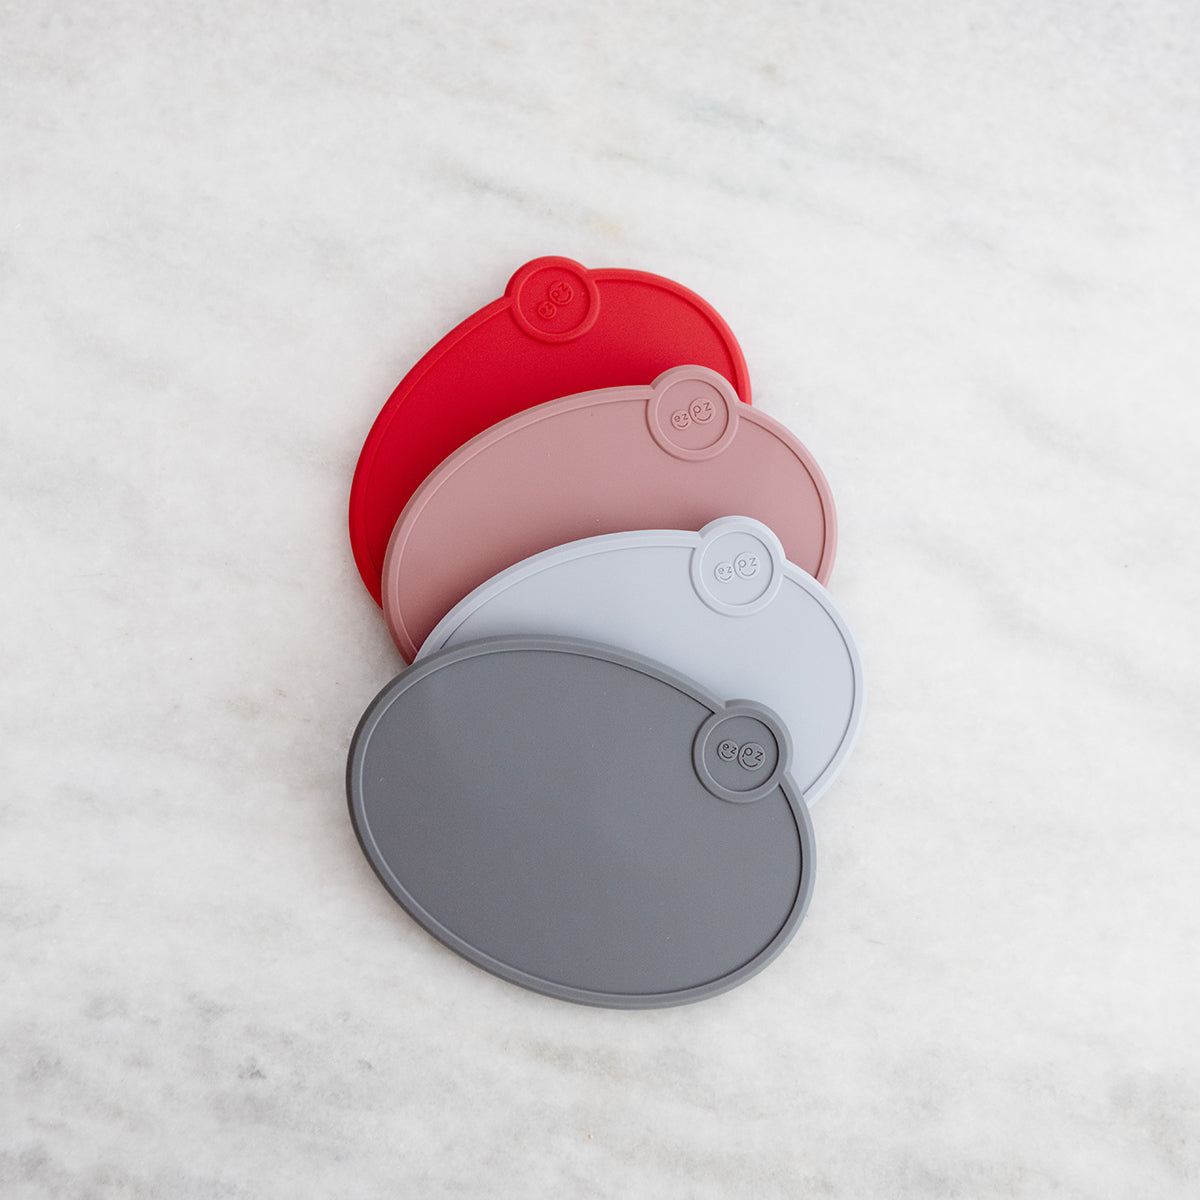 Mini Mat Lid in Pewter / Storage Lids for the Mini Mat by ezpz / Silicone Lid for Toddler Plate